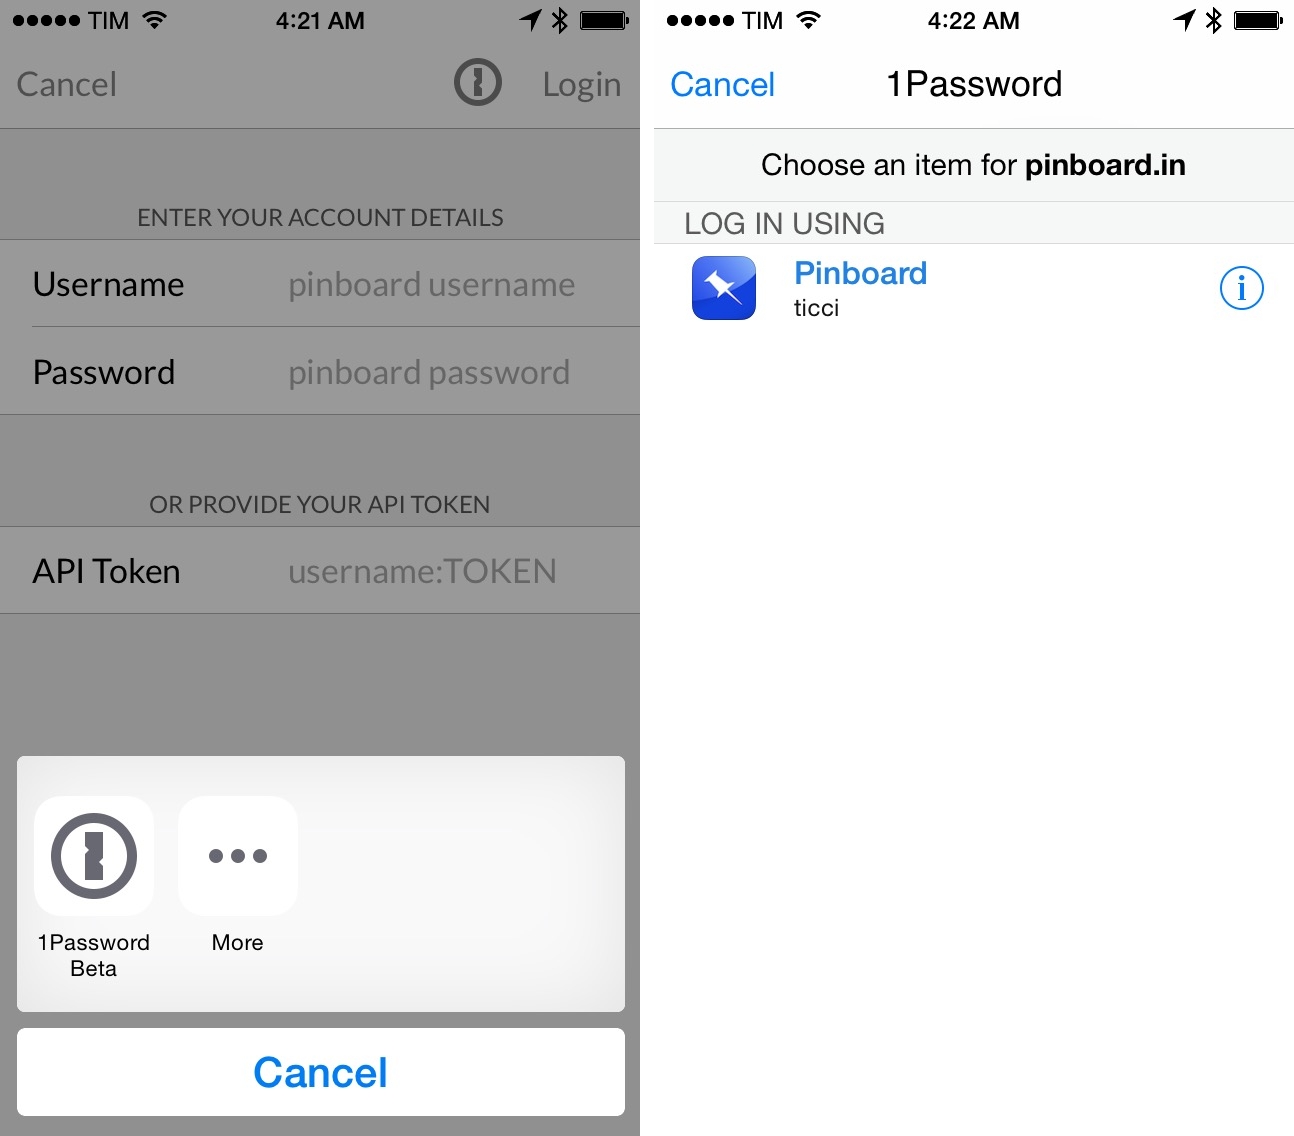 The 1Password extension in a third-party app (Pinner for Pinboard).